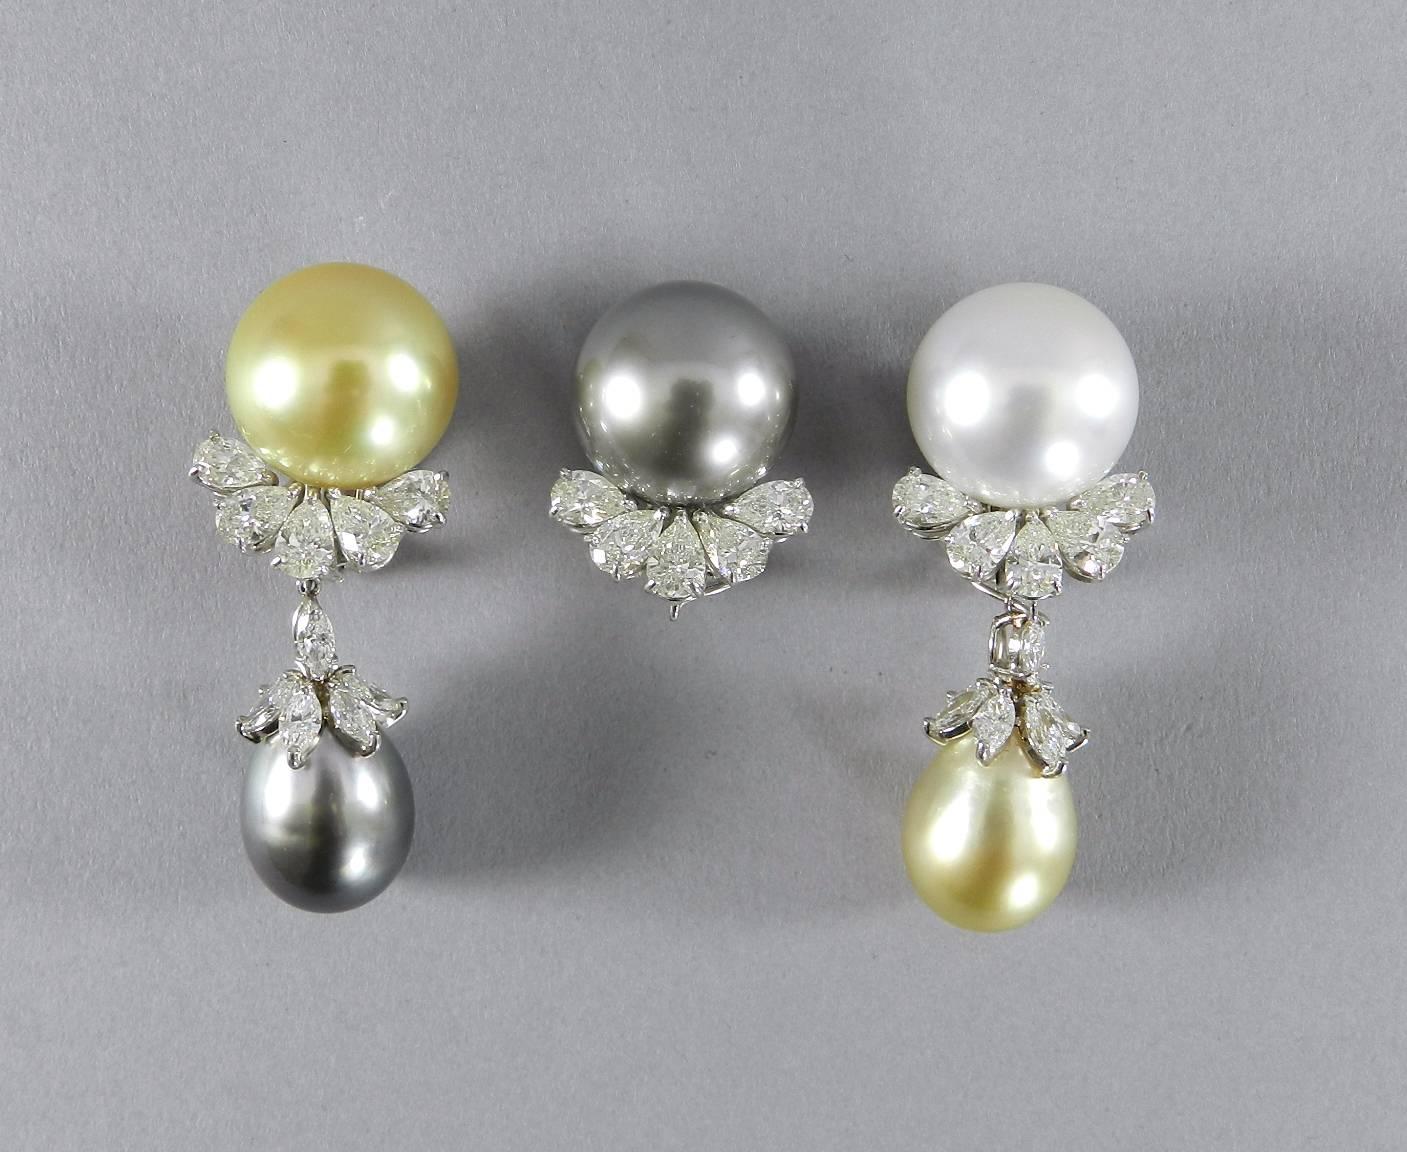 Giovane triple south sea pearl day to night platinum diamond drop earrings. Comes with 3 top clip earrings and 2 matching drops that can be worn interchangeably with the pearl earrings for a color combination of choice. Platinum setting. Total